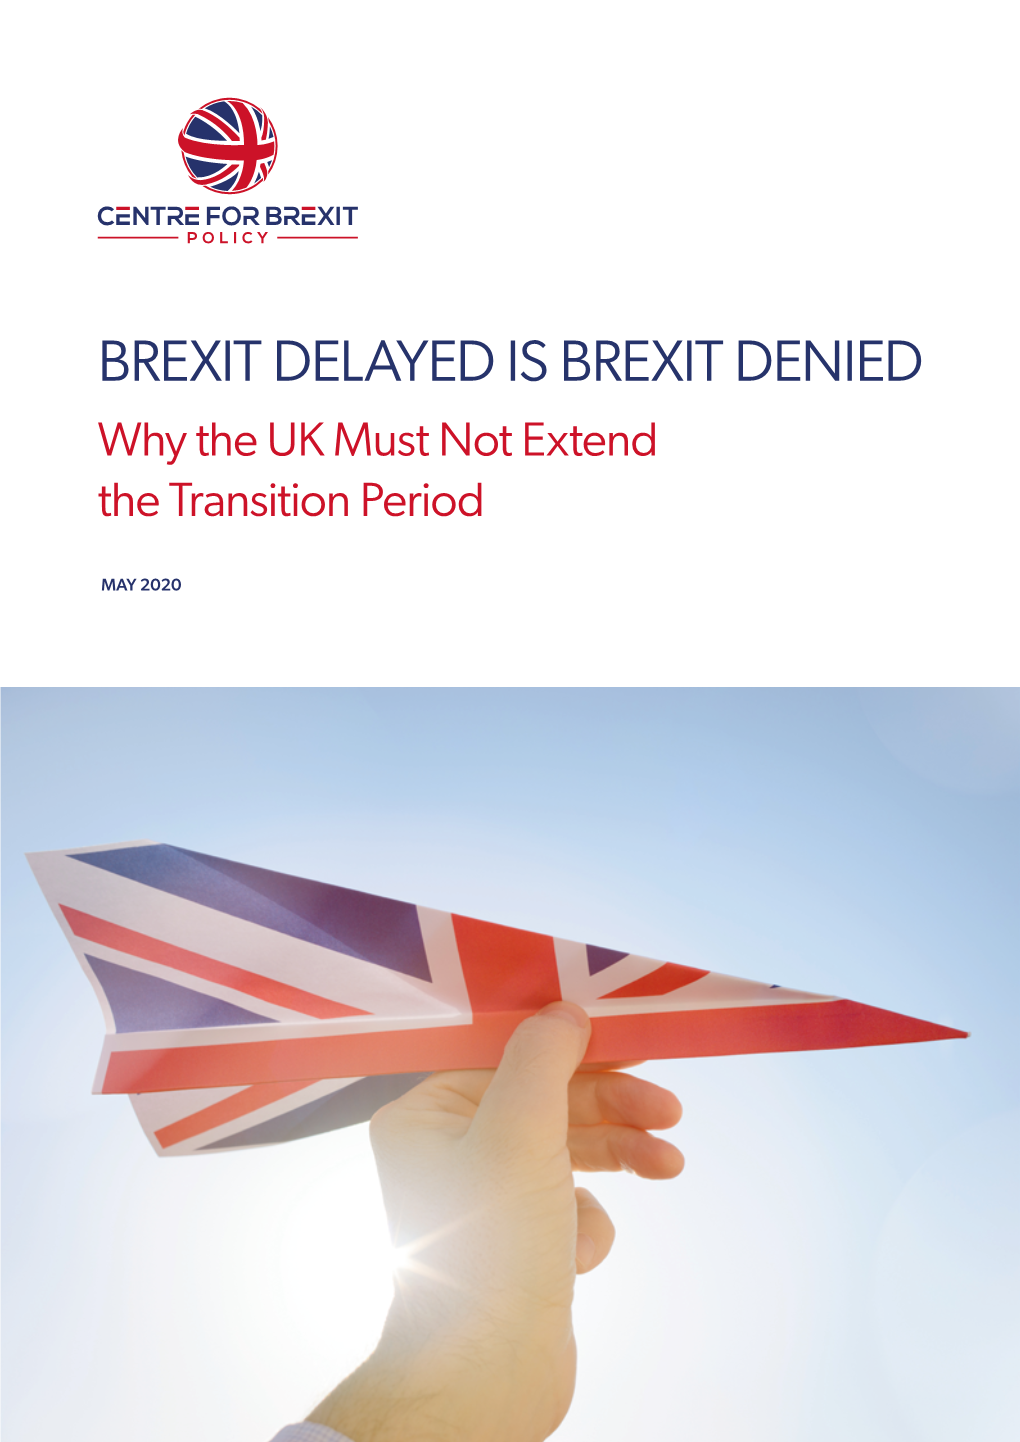 BREXIT DELAYED IS BREXIT DENIED Why the UK Must Not Extend the Transition Period